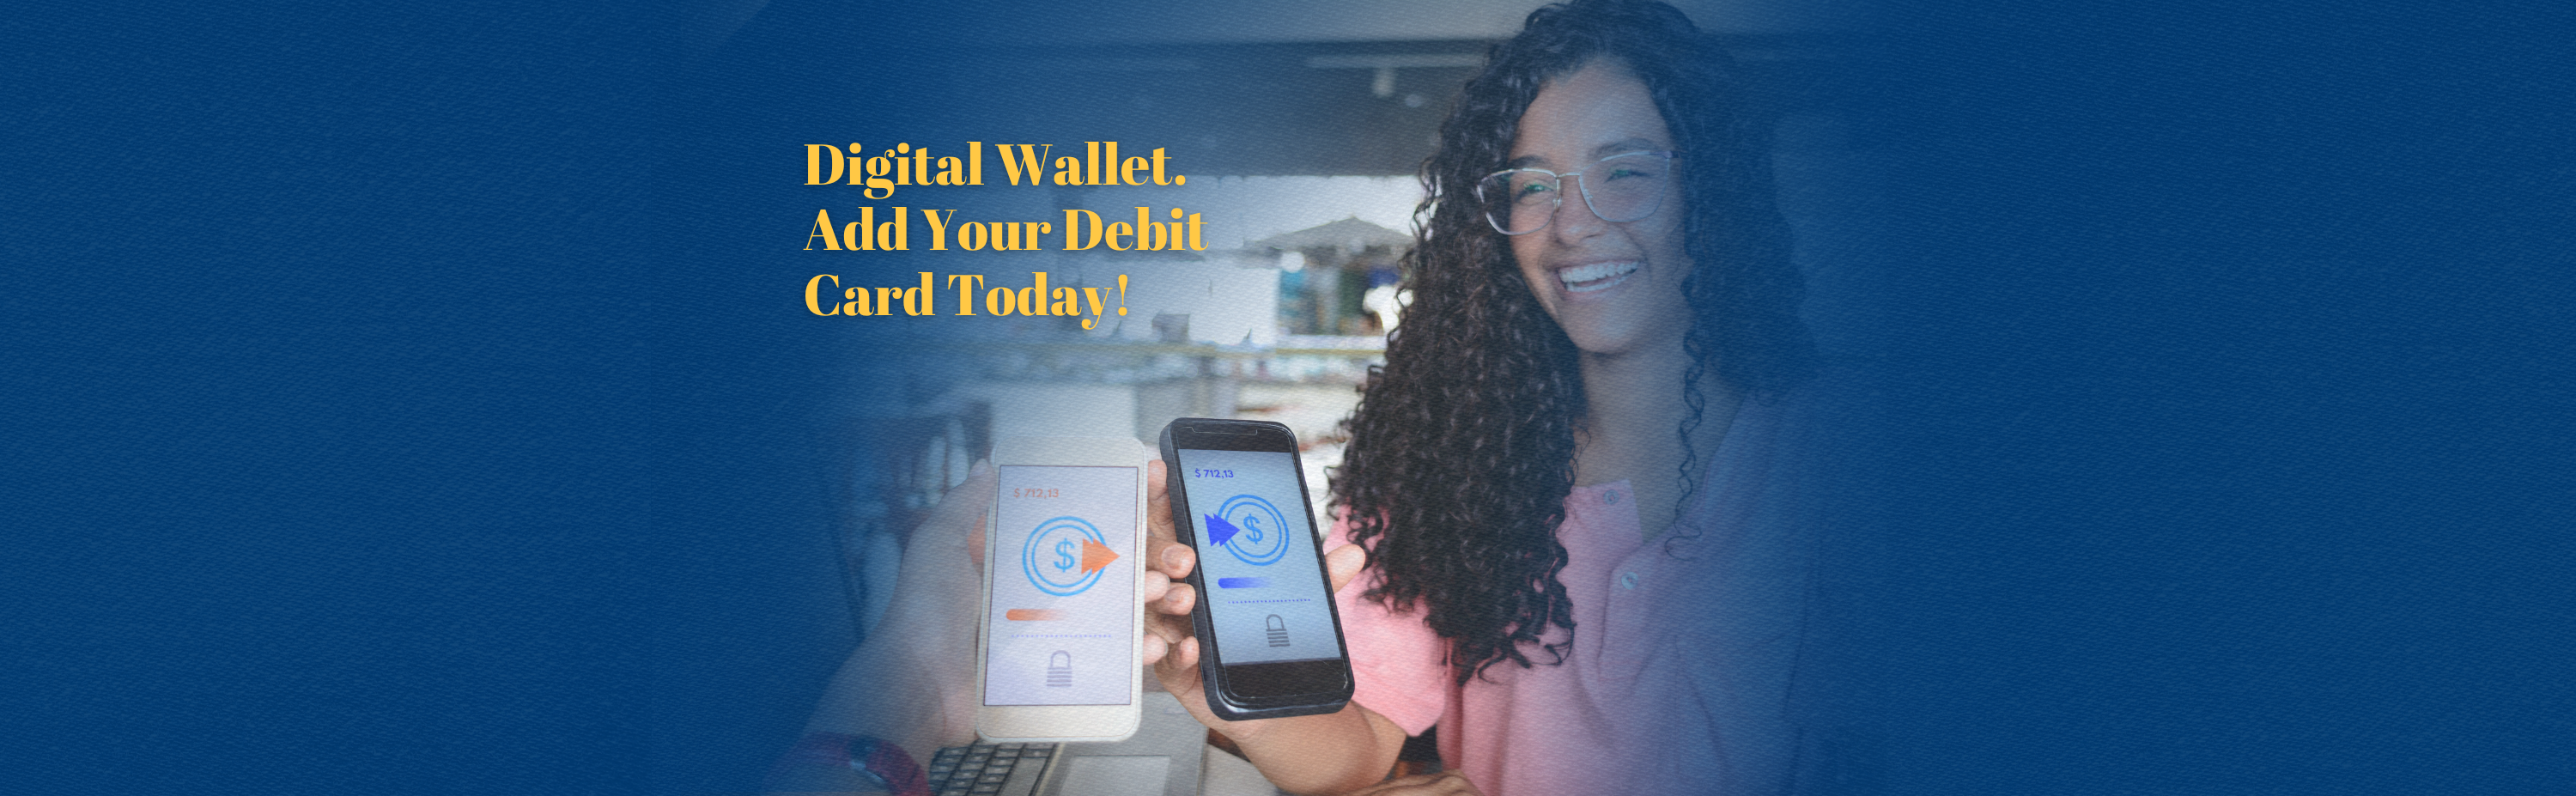 Girl holding a phone using digital wallet to make purchase